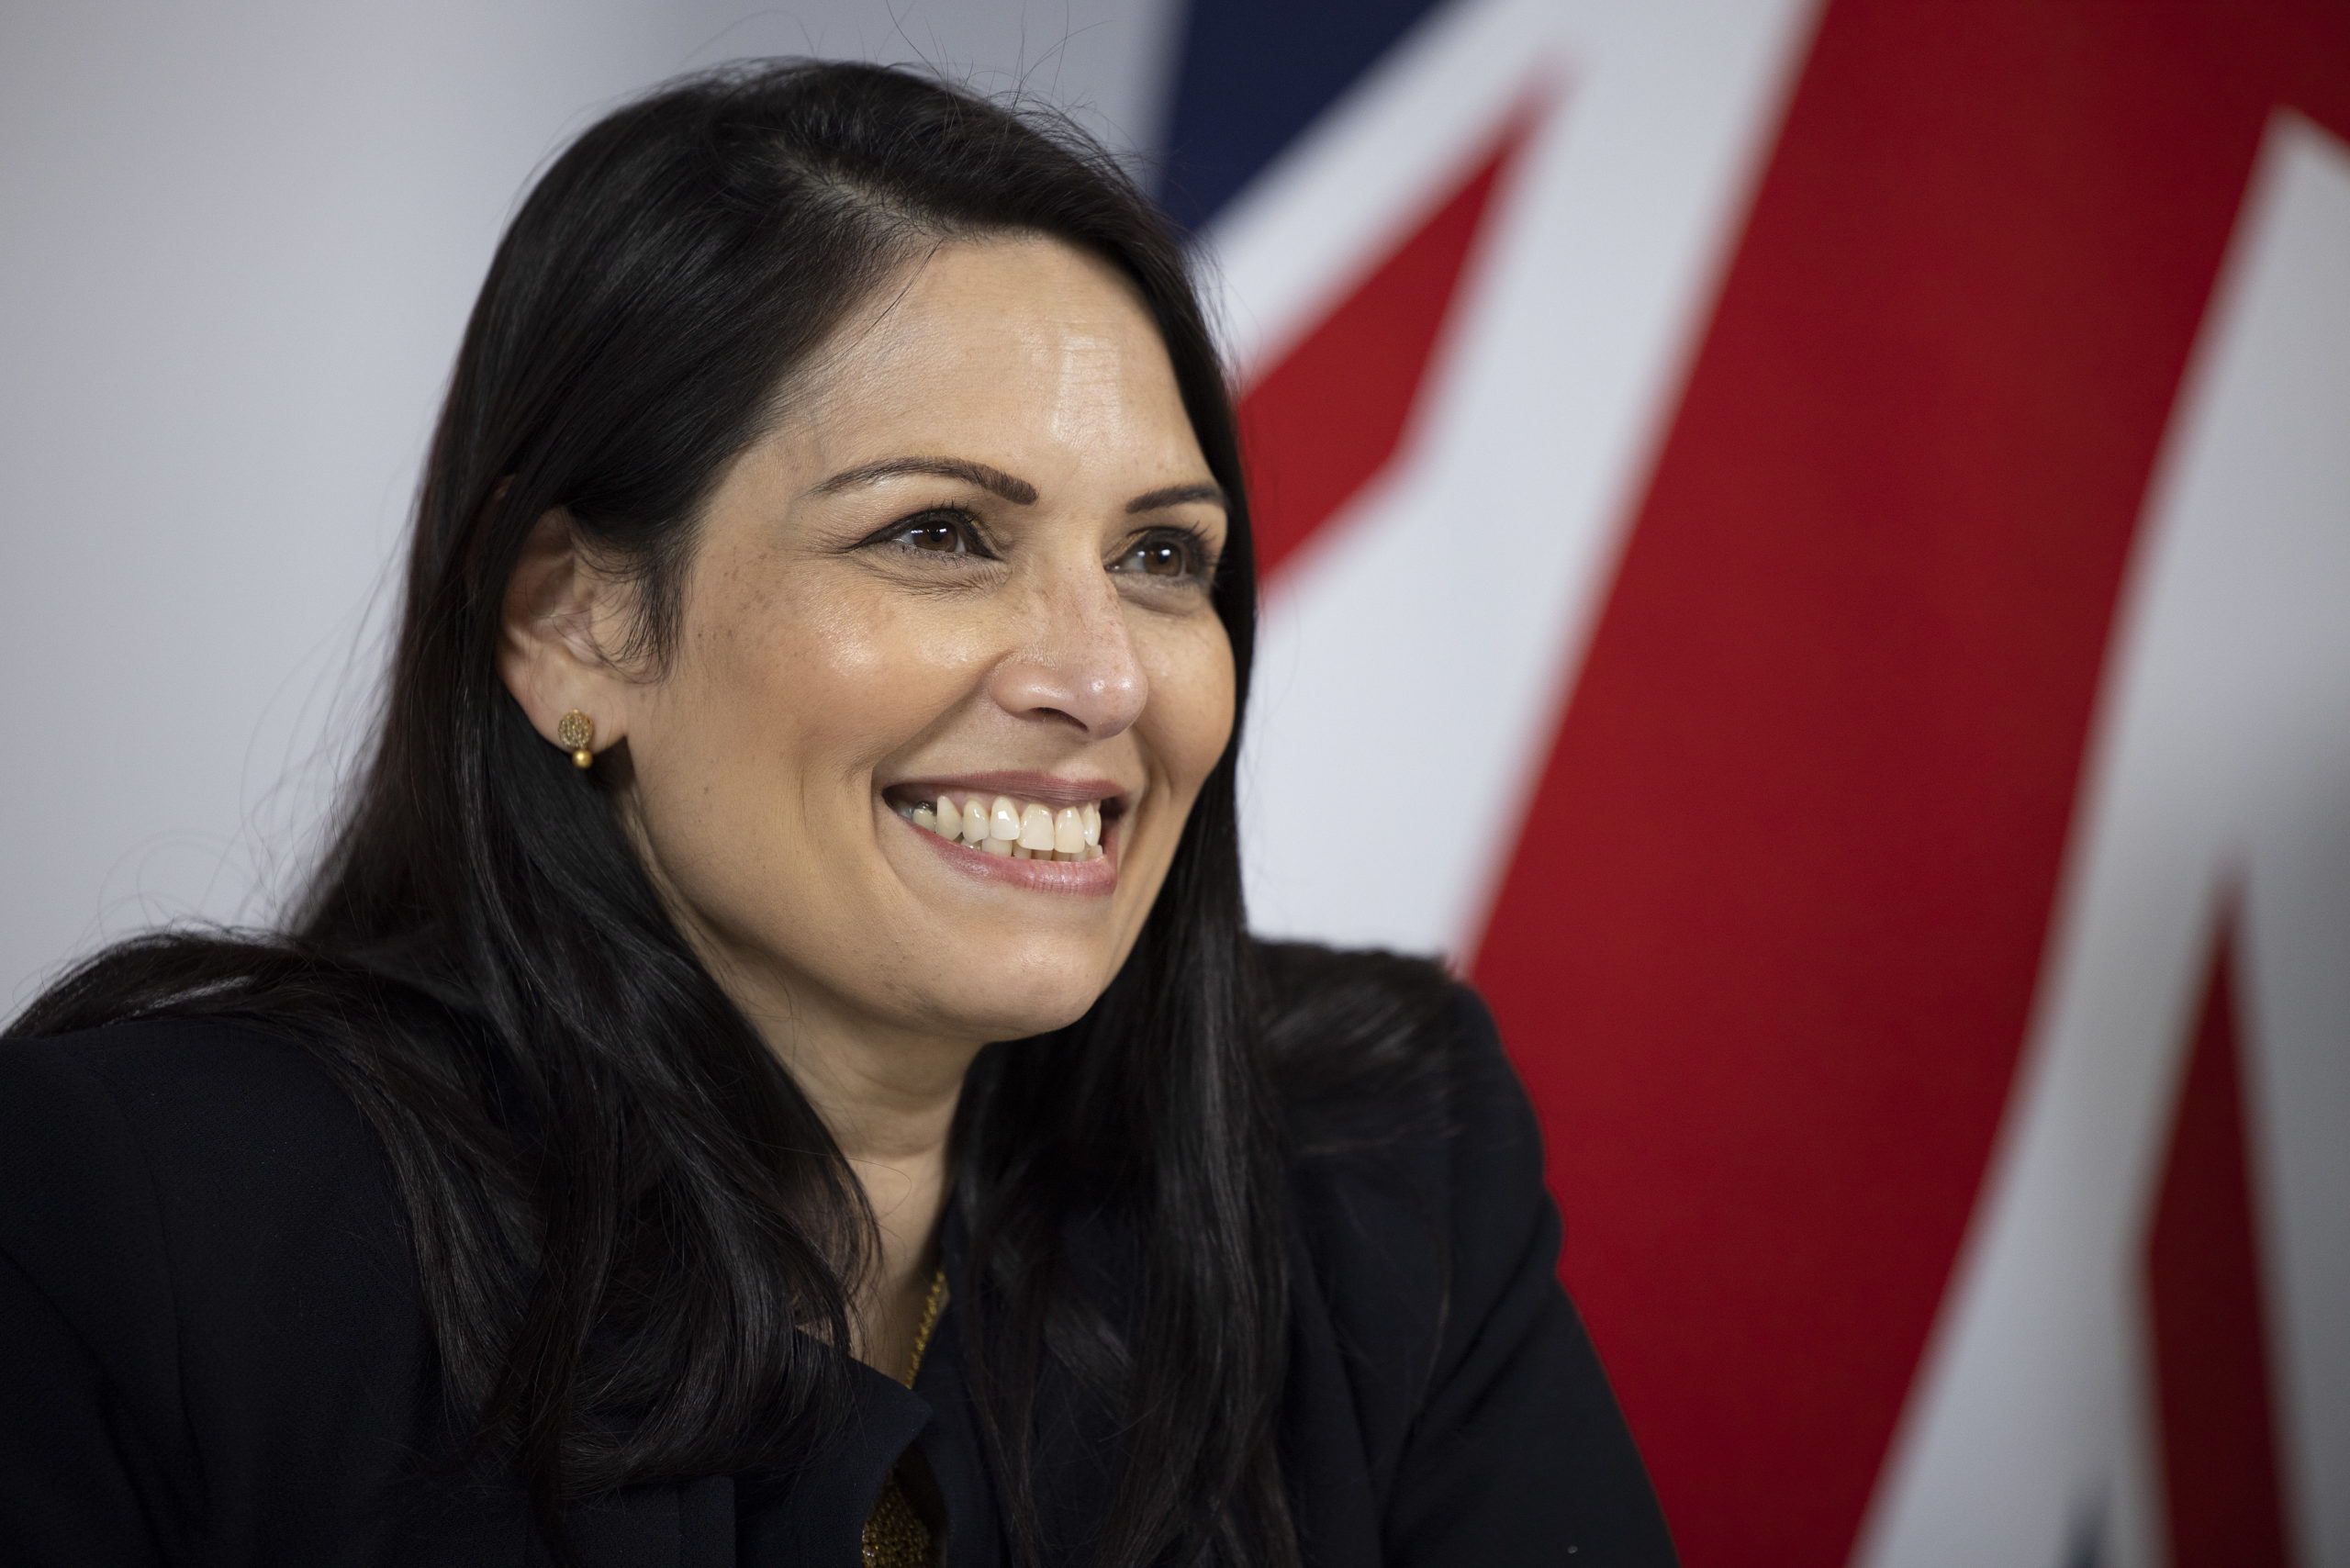 Priti Patel's plans include “reception centres” to provide “basic accommodation” to asylum seekers while their claims are processed